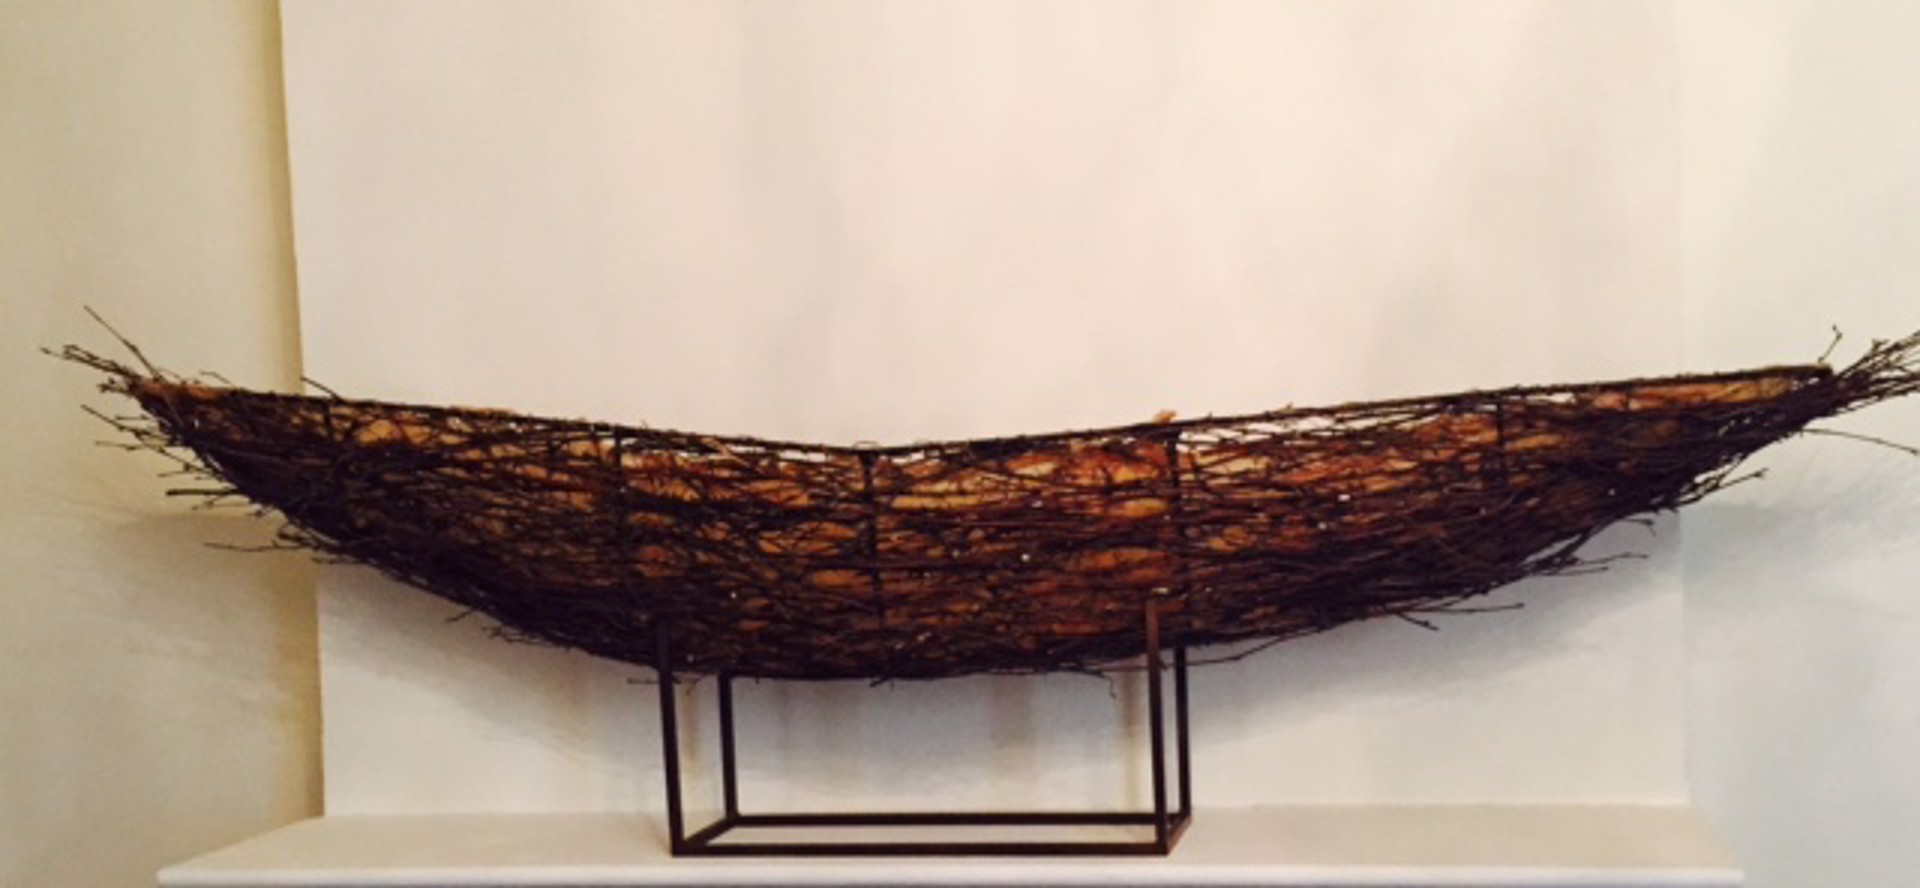 Twig Boat by Raine Bedsole